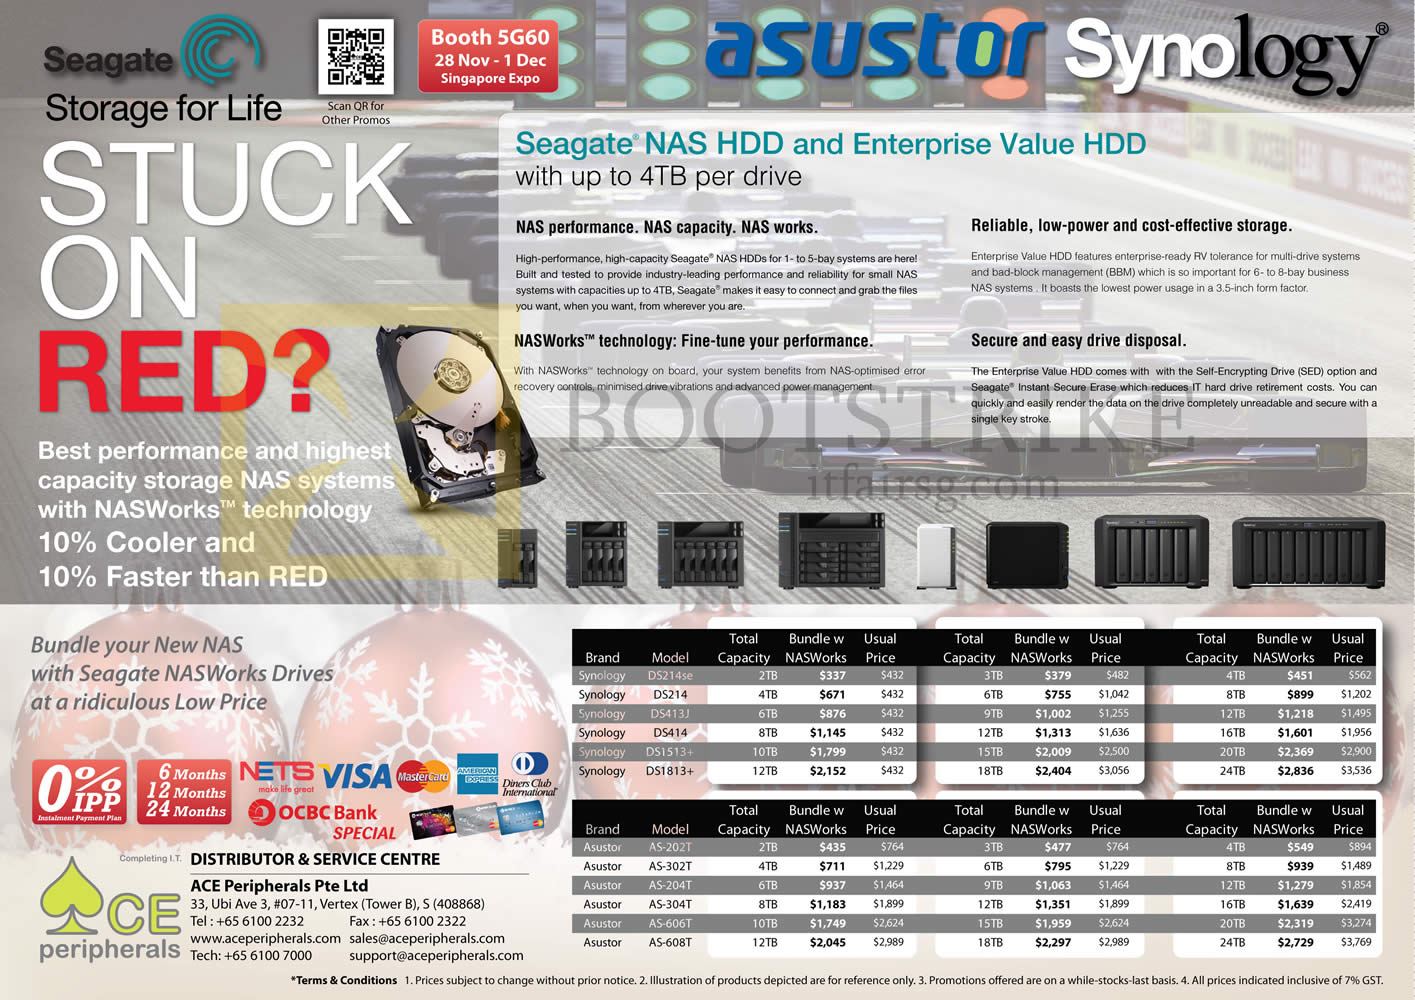 SITEX 2013 price list image brochure of Ace Peripherals Seagate NASWorks HardDisk Drive, Synology, Asustor